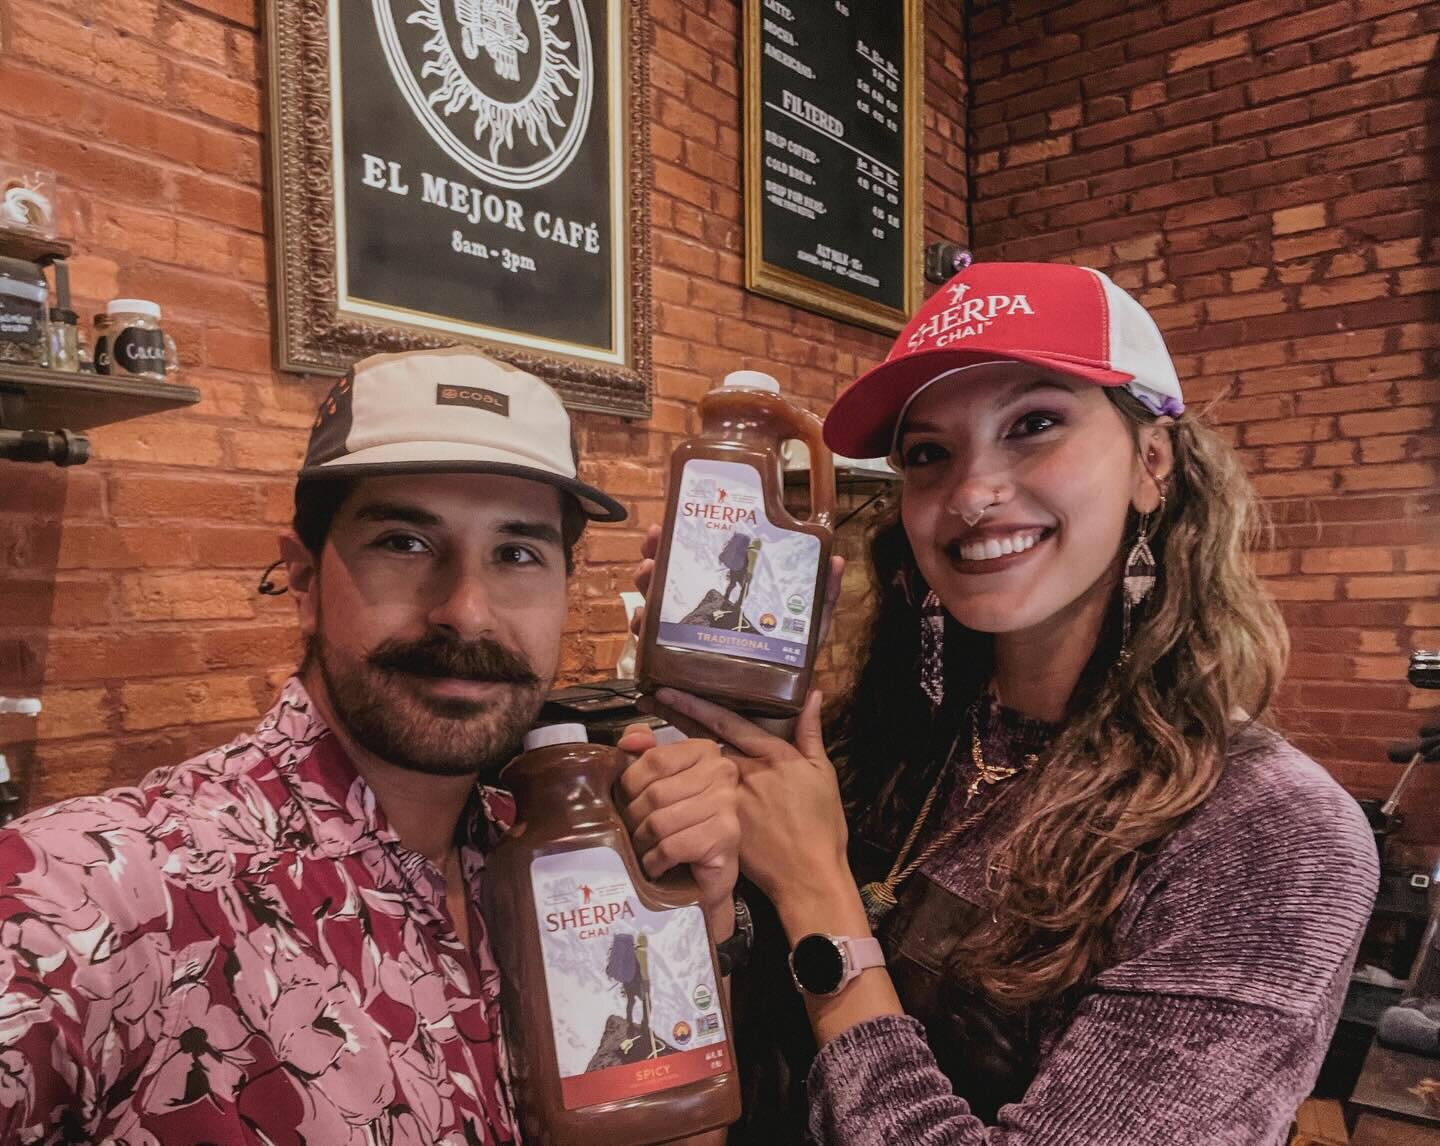 Thanks @sherpachai for coming down to Texas and hooking us up with some Sherpa Swag! Sherpa Chai is by far our favorite chai. Spicy or Traditional, you can&rsquo;t go wrong 🫖

#sherpachai #colorado #elmejorcafe #dfwcoffee #downtownmckinneytx